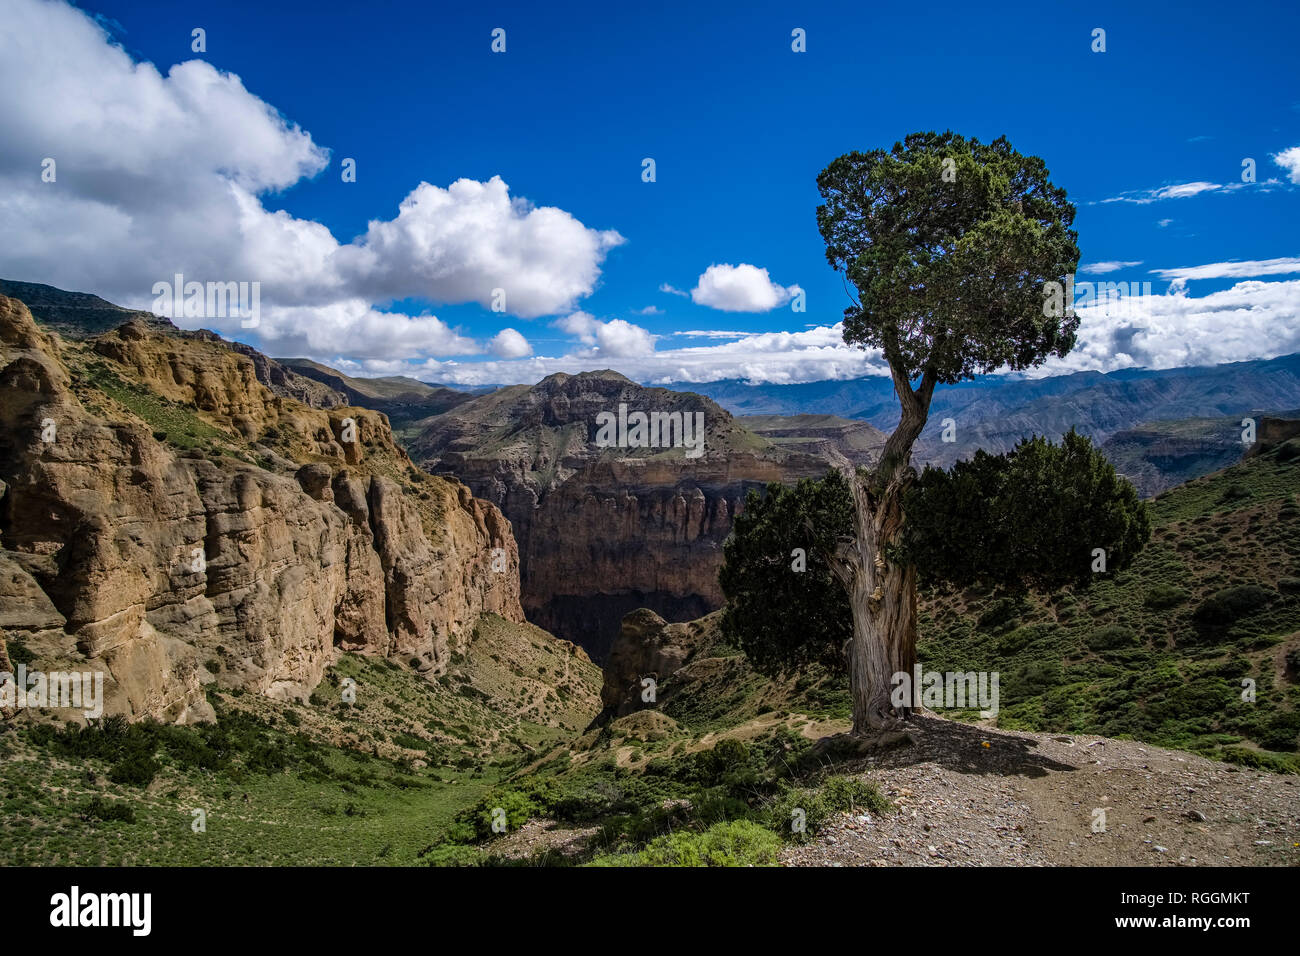 Alpine landscape with steep rock faces and trees in Upper Mustang Stock Photo